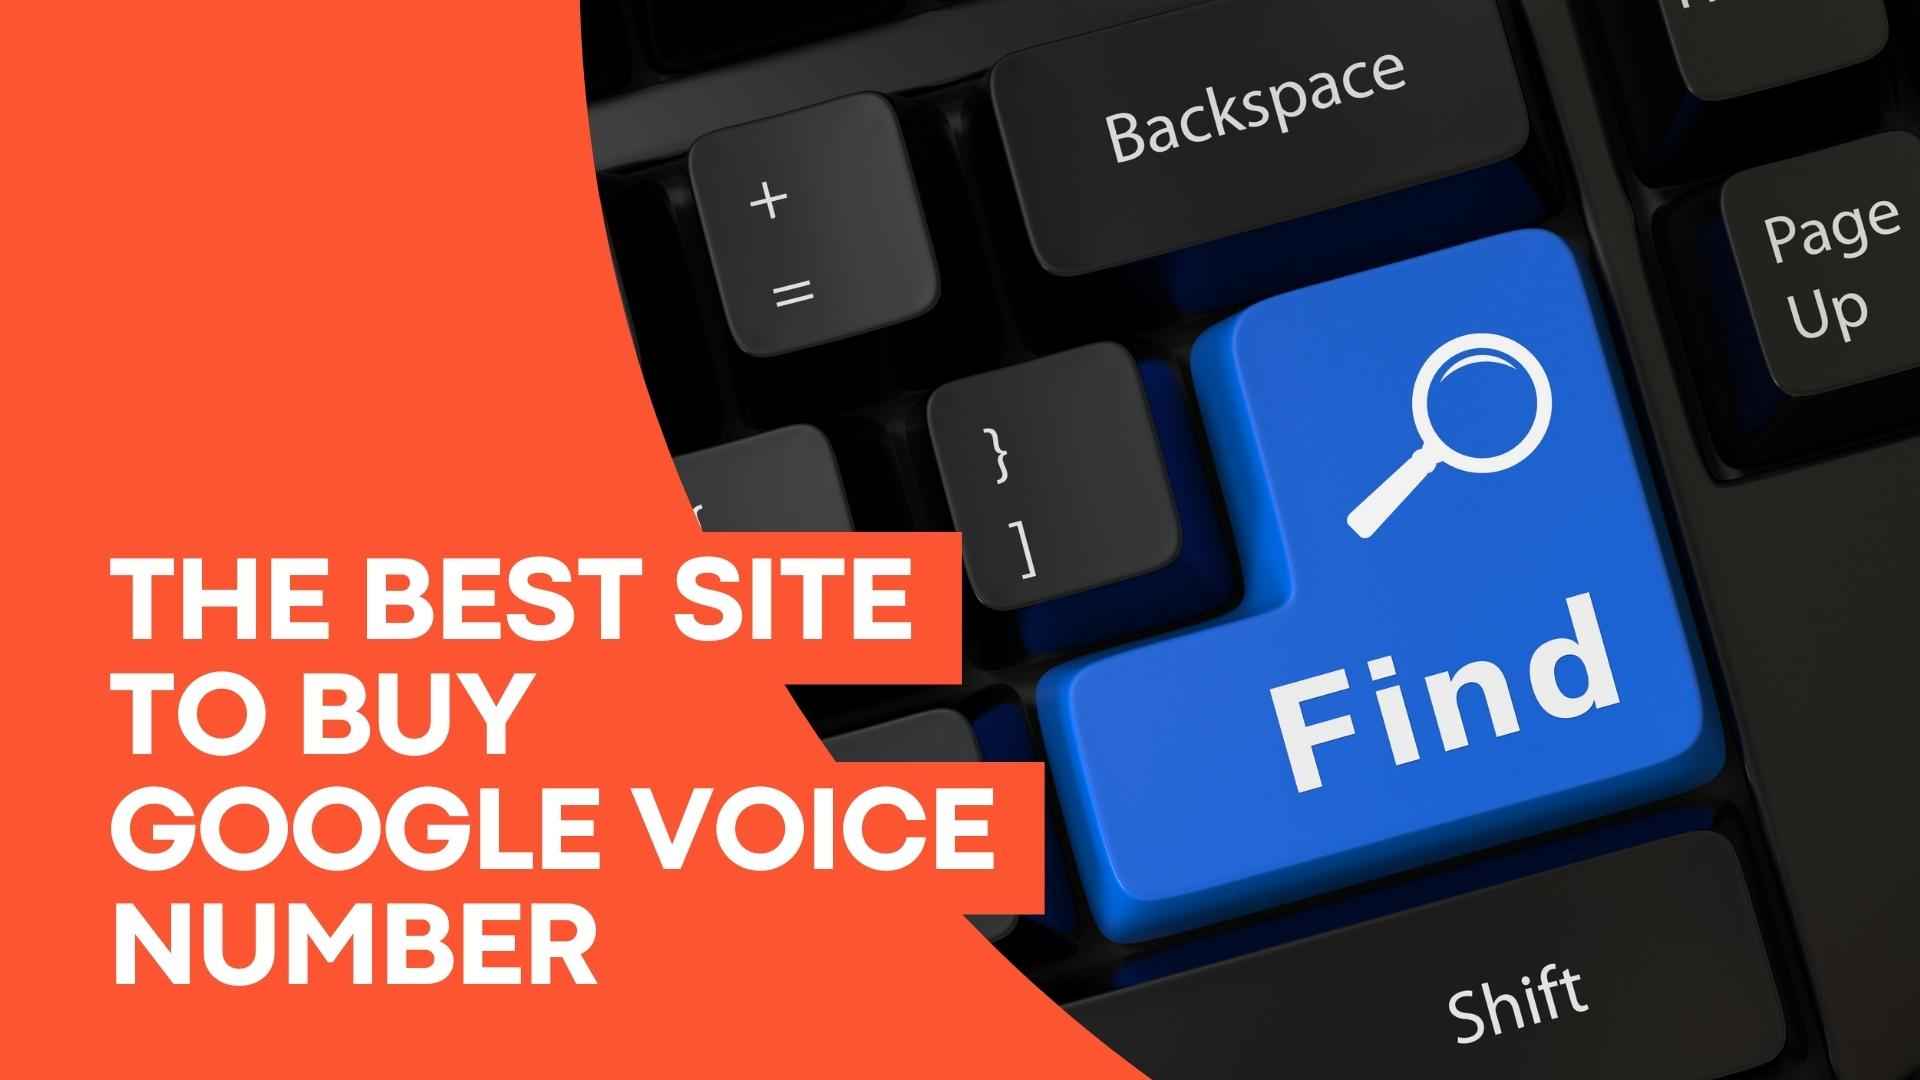 The Best Site to Buy Google Voice Number